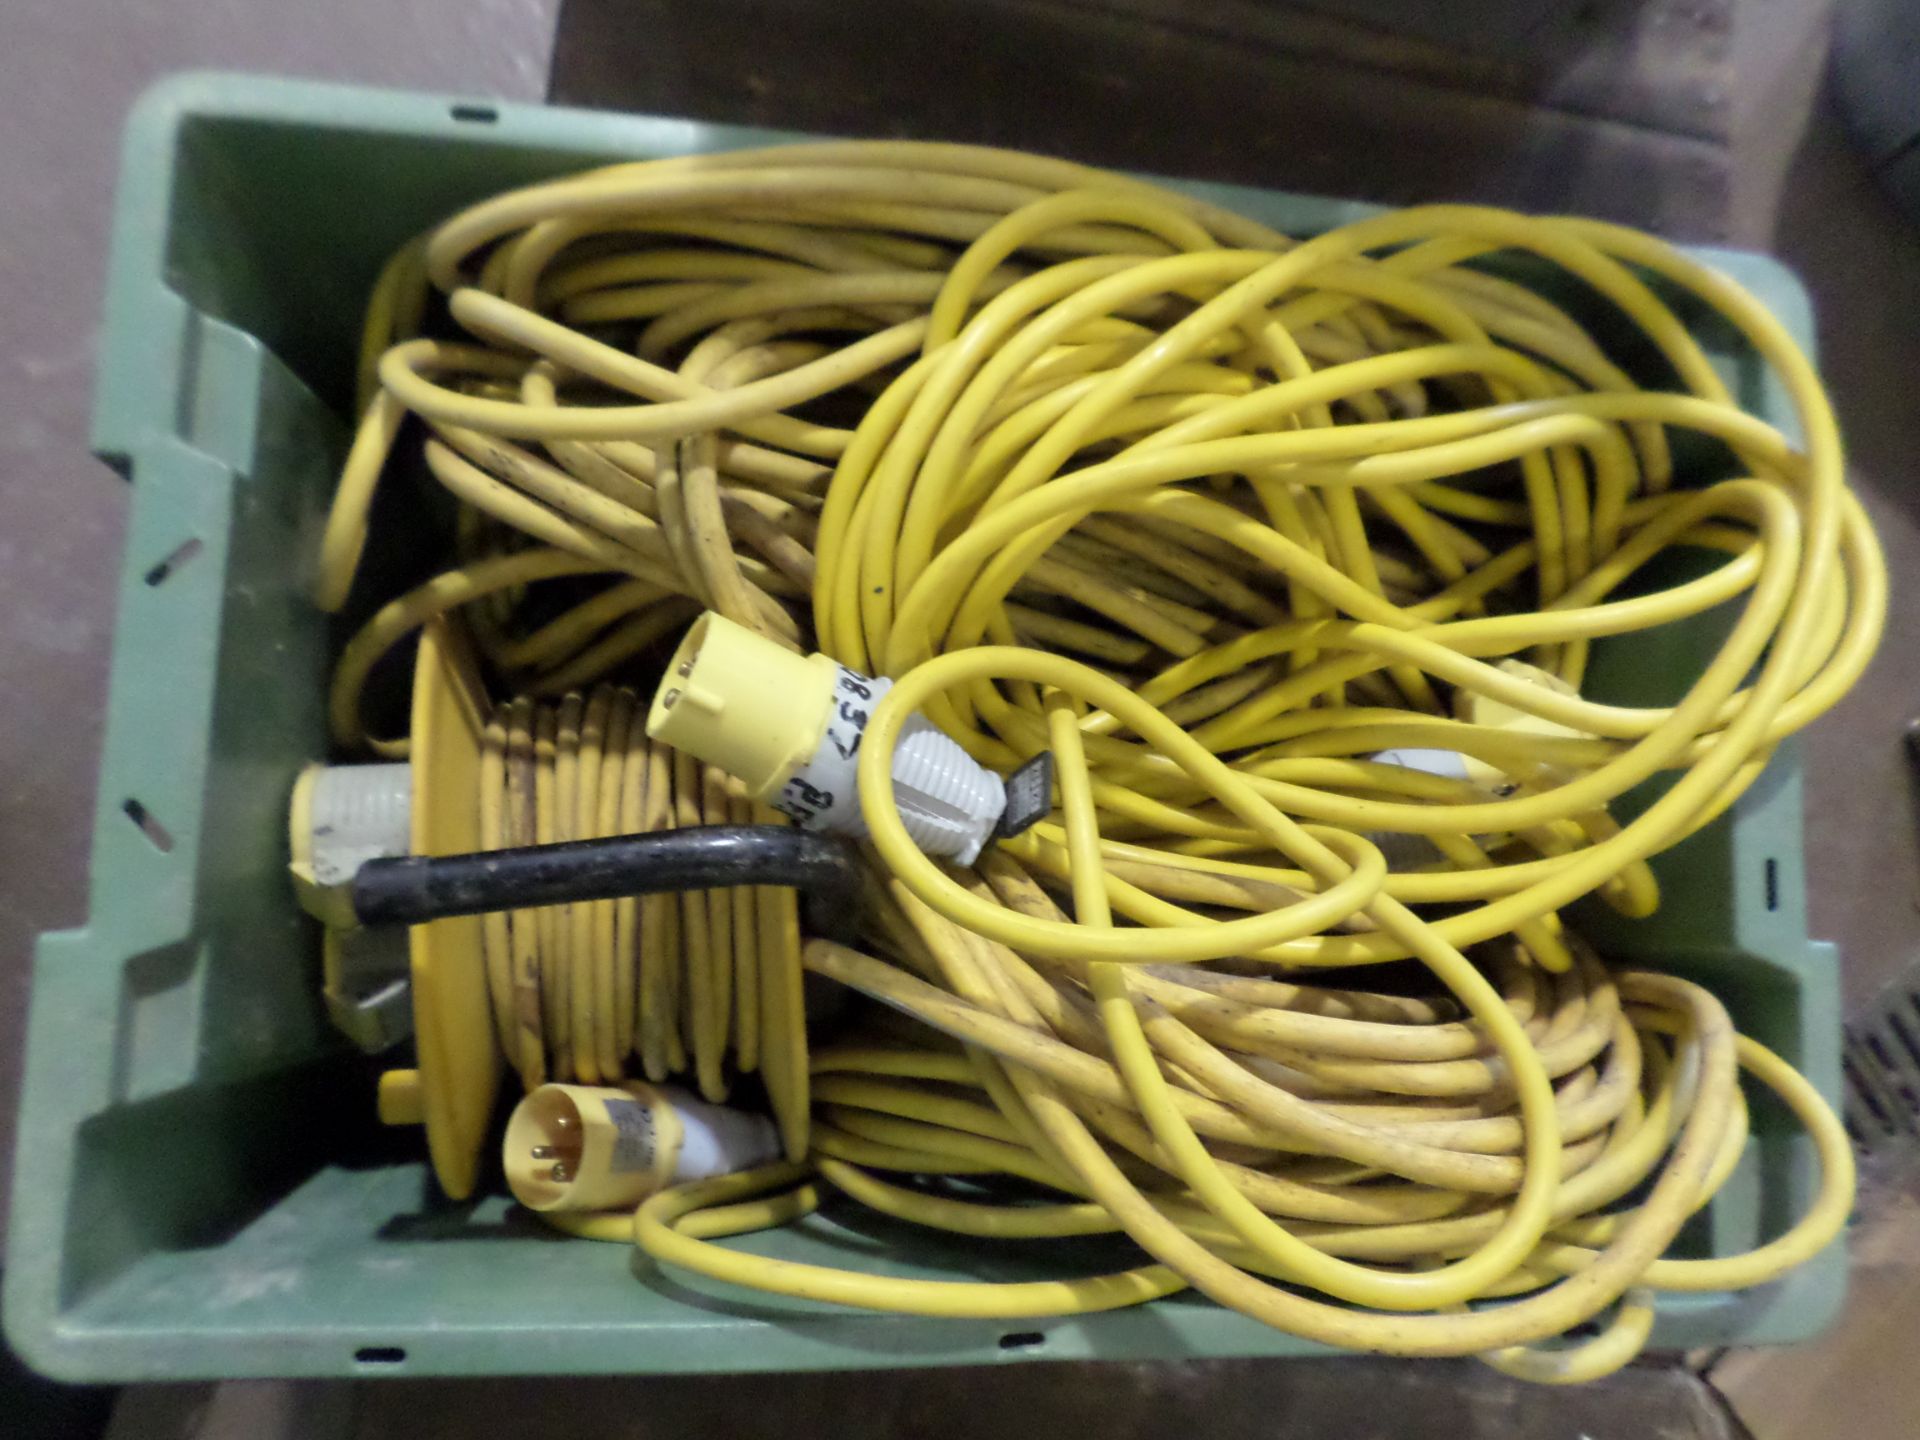 Large quantity of 110v extension cable(s)